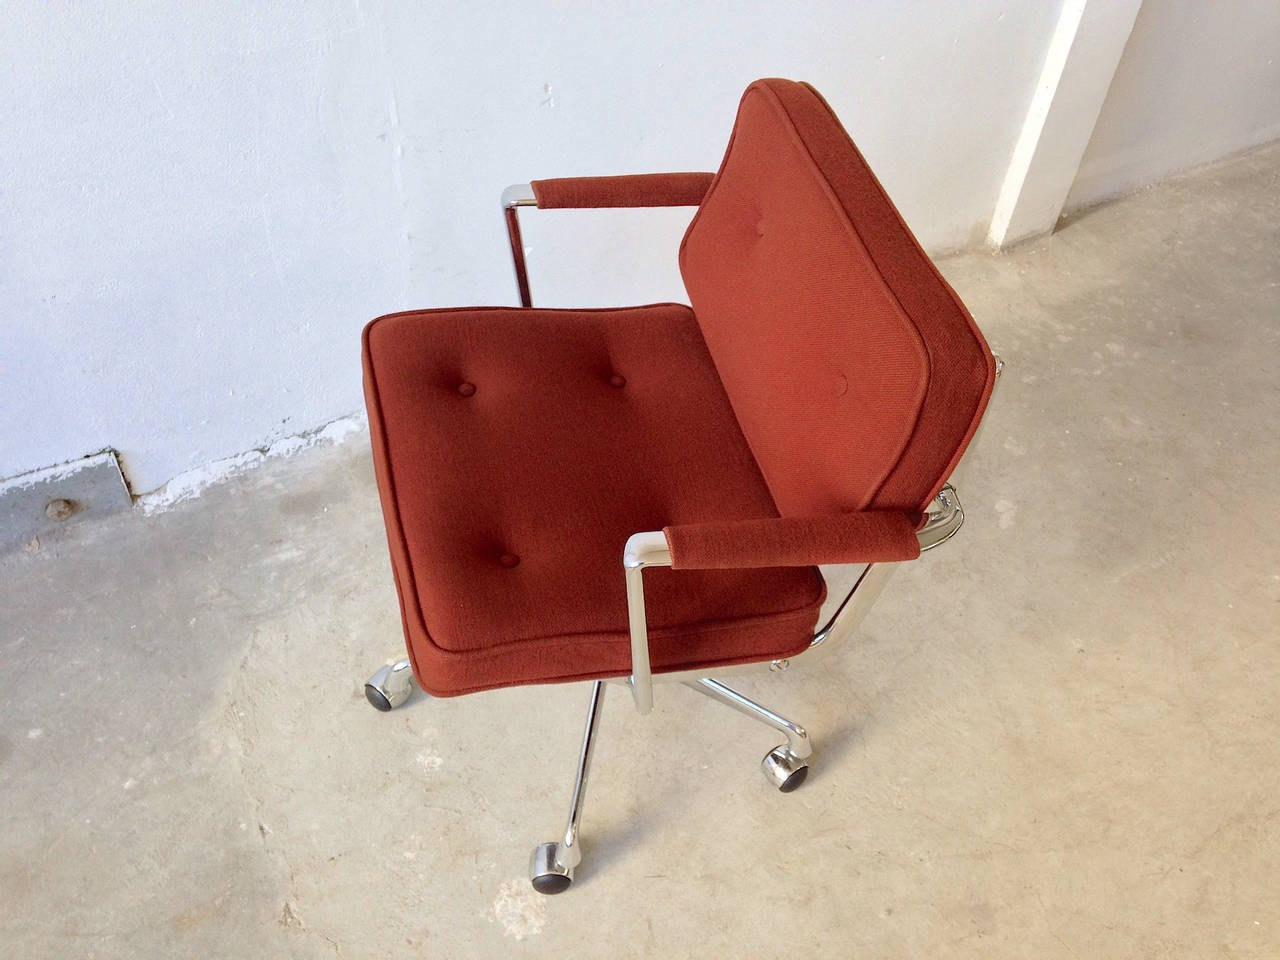 Charles EAMES

rare set of 4 Eames intermediate Desk Chairs in nice conditions. Was only in production for a few years. Aluminium frame, original tobacco fabric upholstery, new foam. Very comfortable desk chair even by today's standards. Full